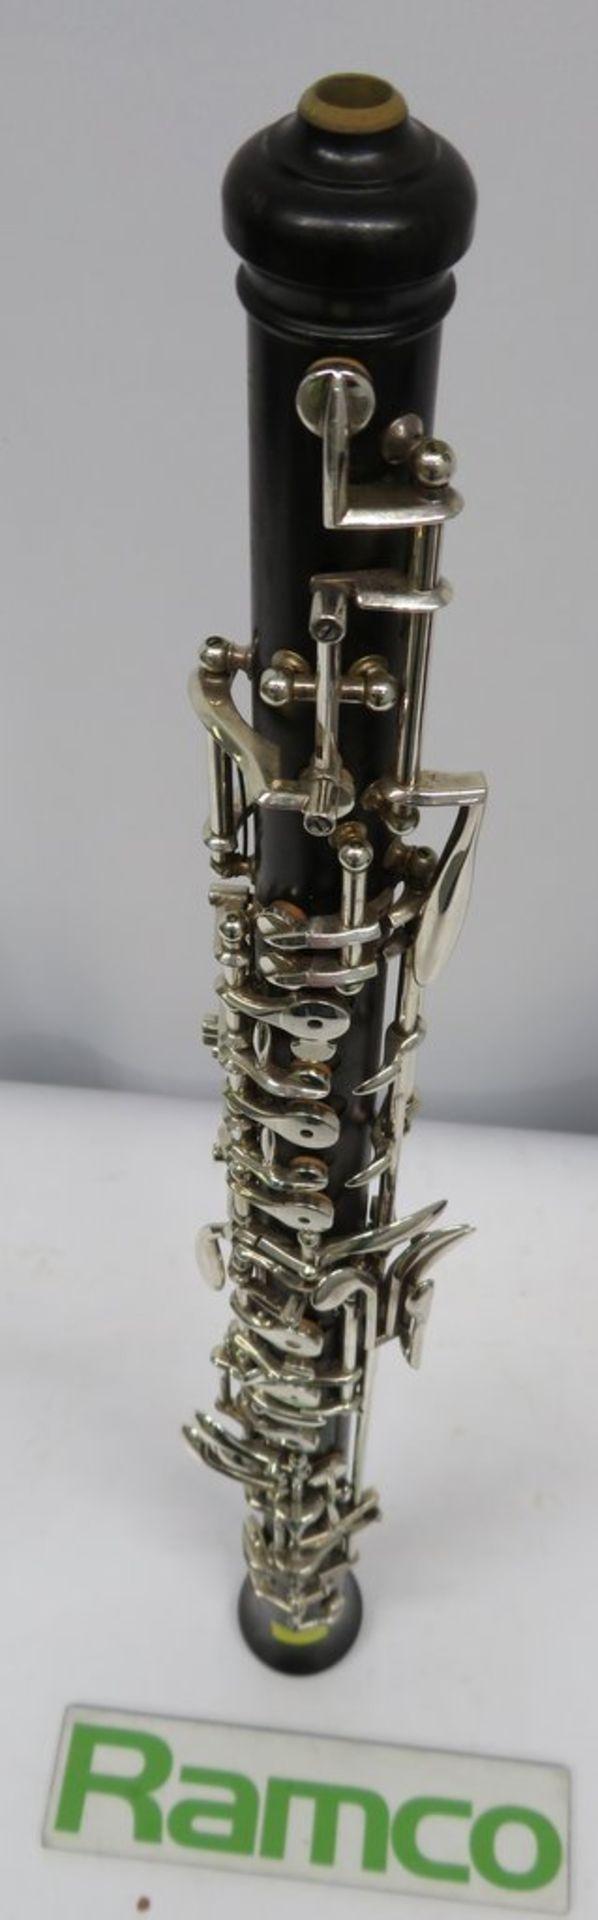 Buffet Crampon Oboe With Case. Serial Number: 9729. Please Note That This Item Has Not Be - Image 4 of 18